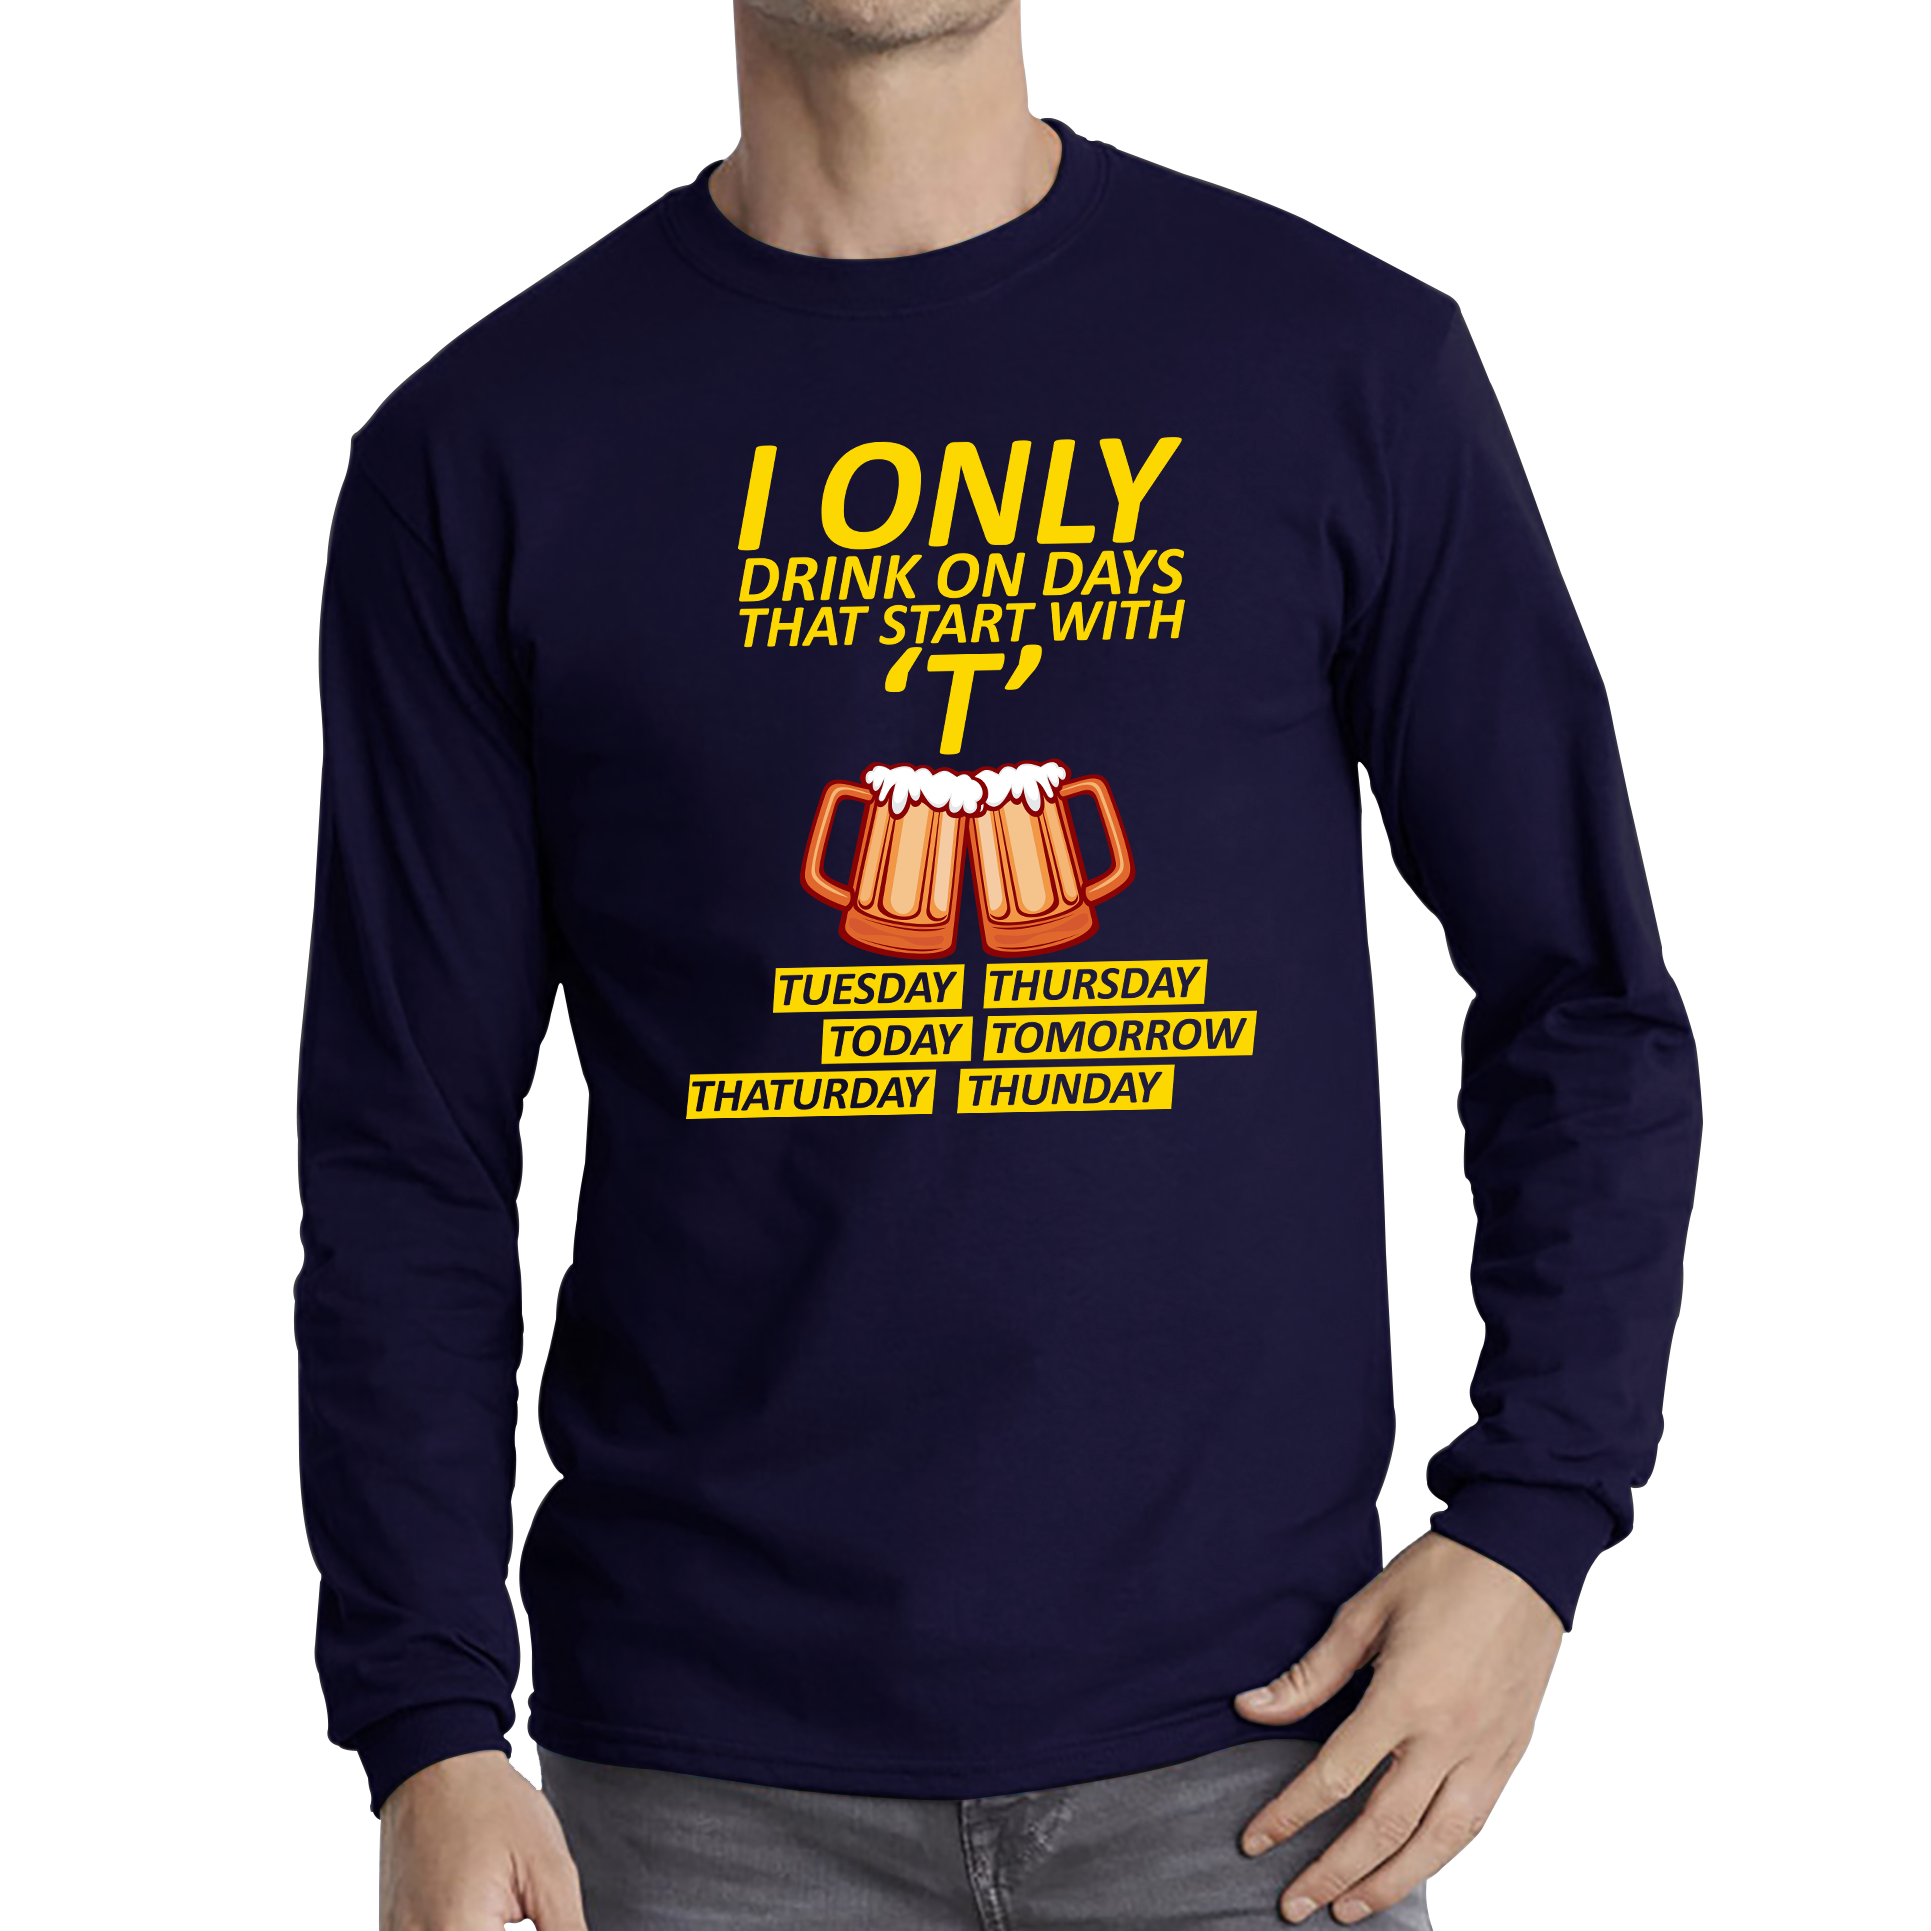 I Only Drink On Days That Start With T, Tuesday, Thursday, Today, Tomorrow, Thaturday, Thunday Adult Long Sleeve T Shirt